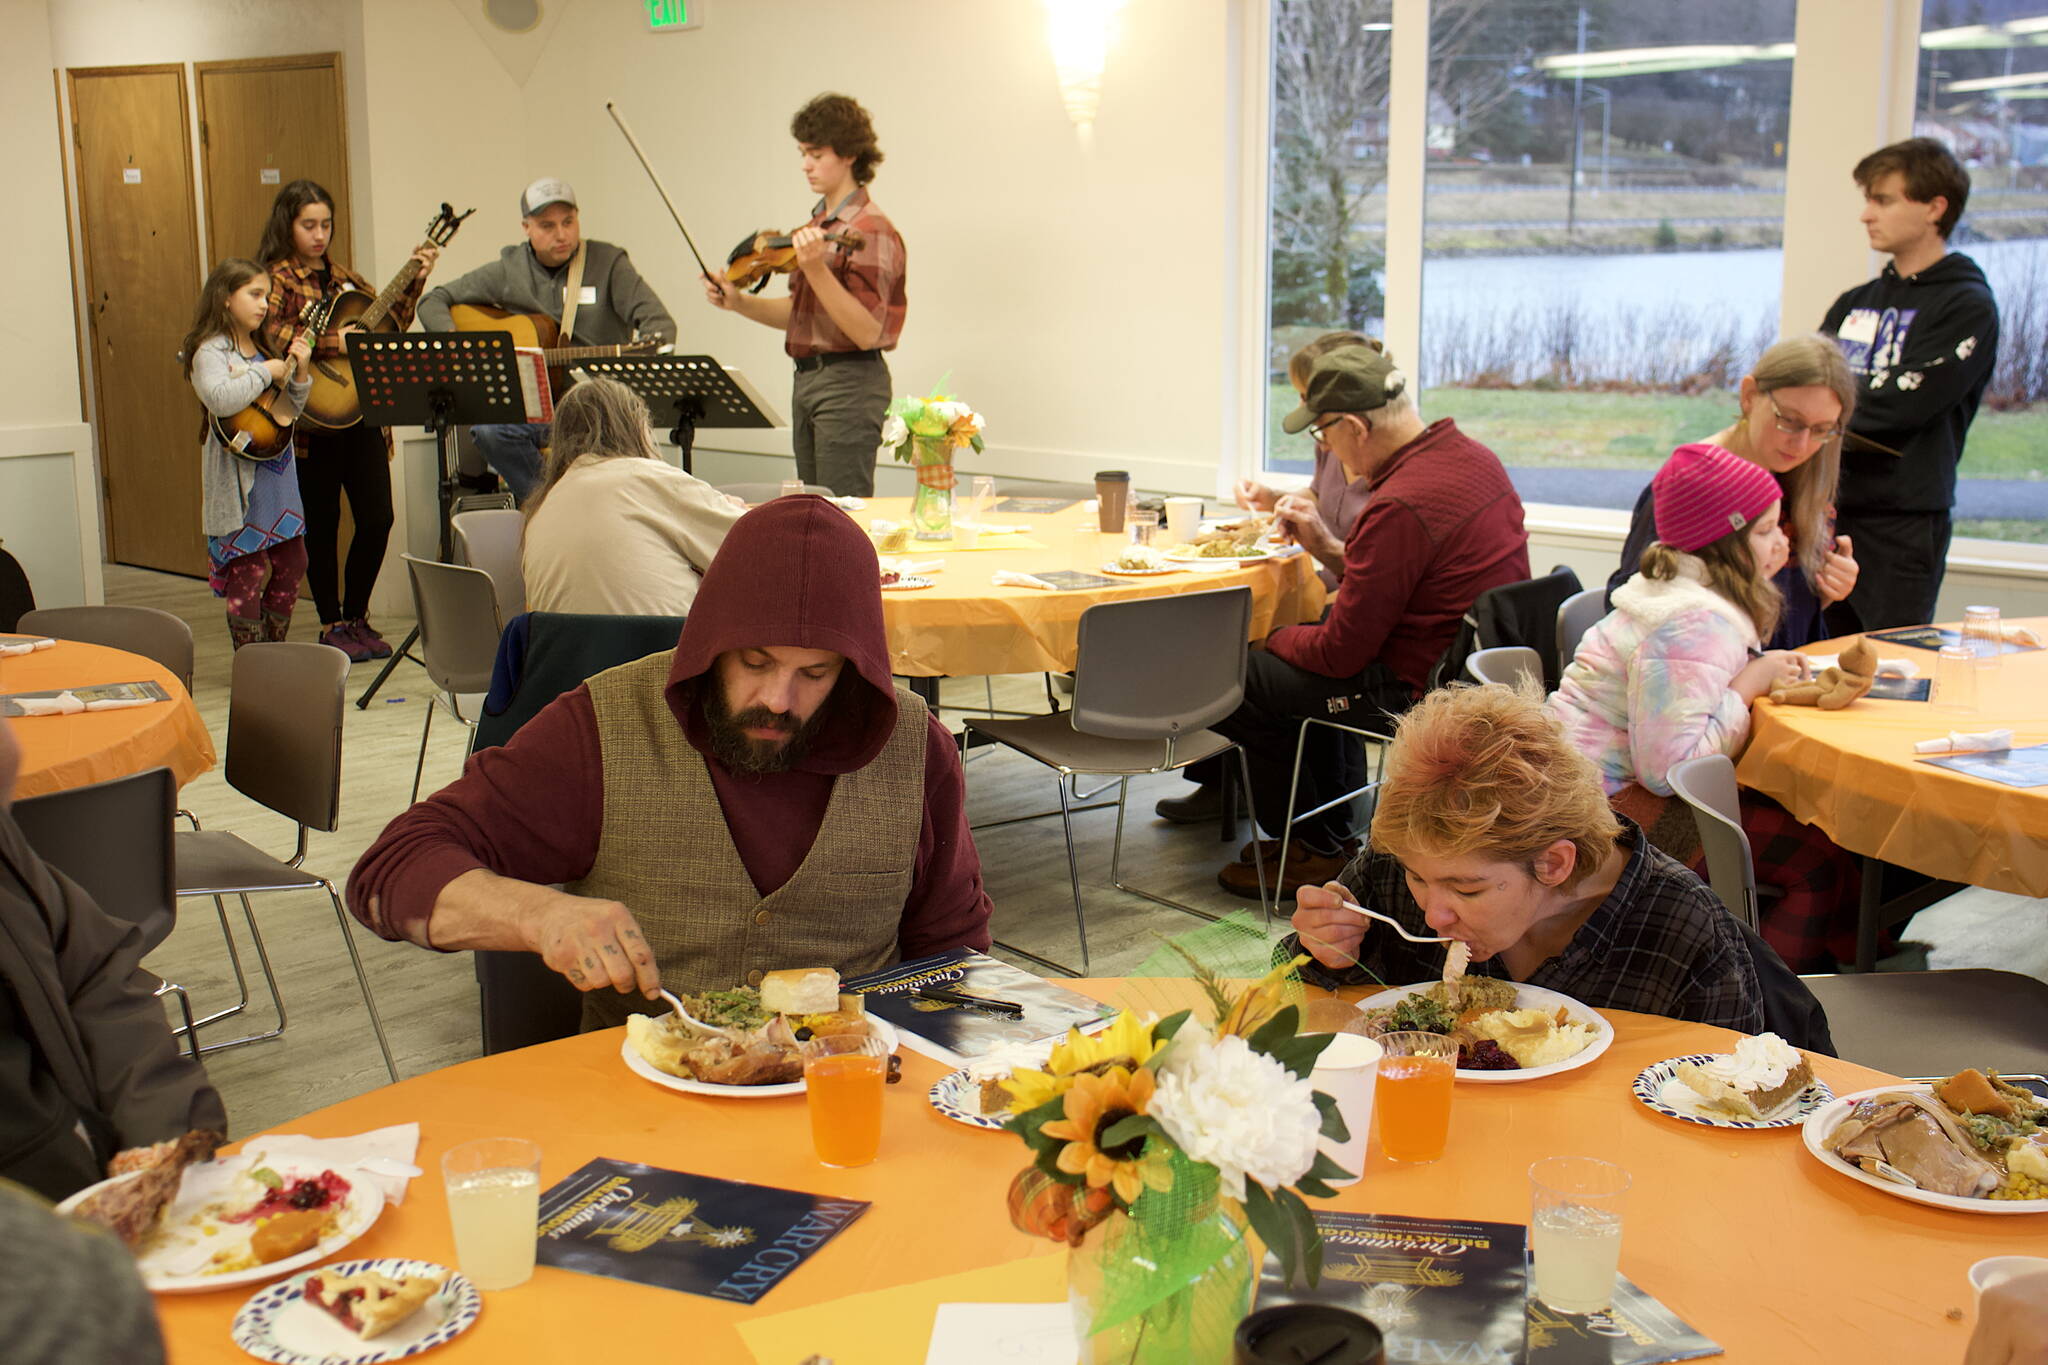 Garrett Derr and Valerie Parkinson eat Thanksgiving Dinner while the Koski Family Band plays folk music in the background at midday Thursday at the Juneau Yacht Club. Both are staying at The Glory Hall, which provided transportation for its residents to and from the annual meal hosted by The Salvation Army. (Mark Sabbatini / Juneau Empire)